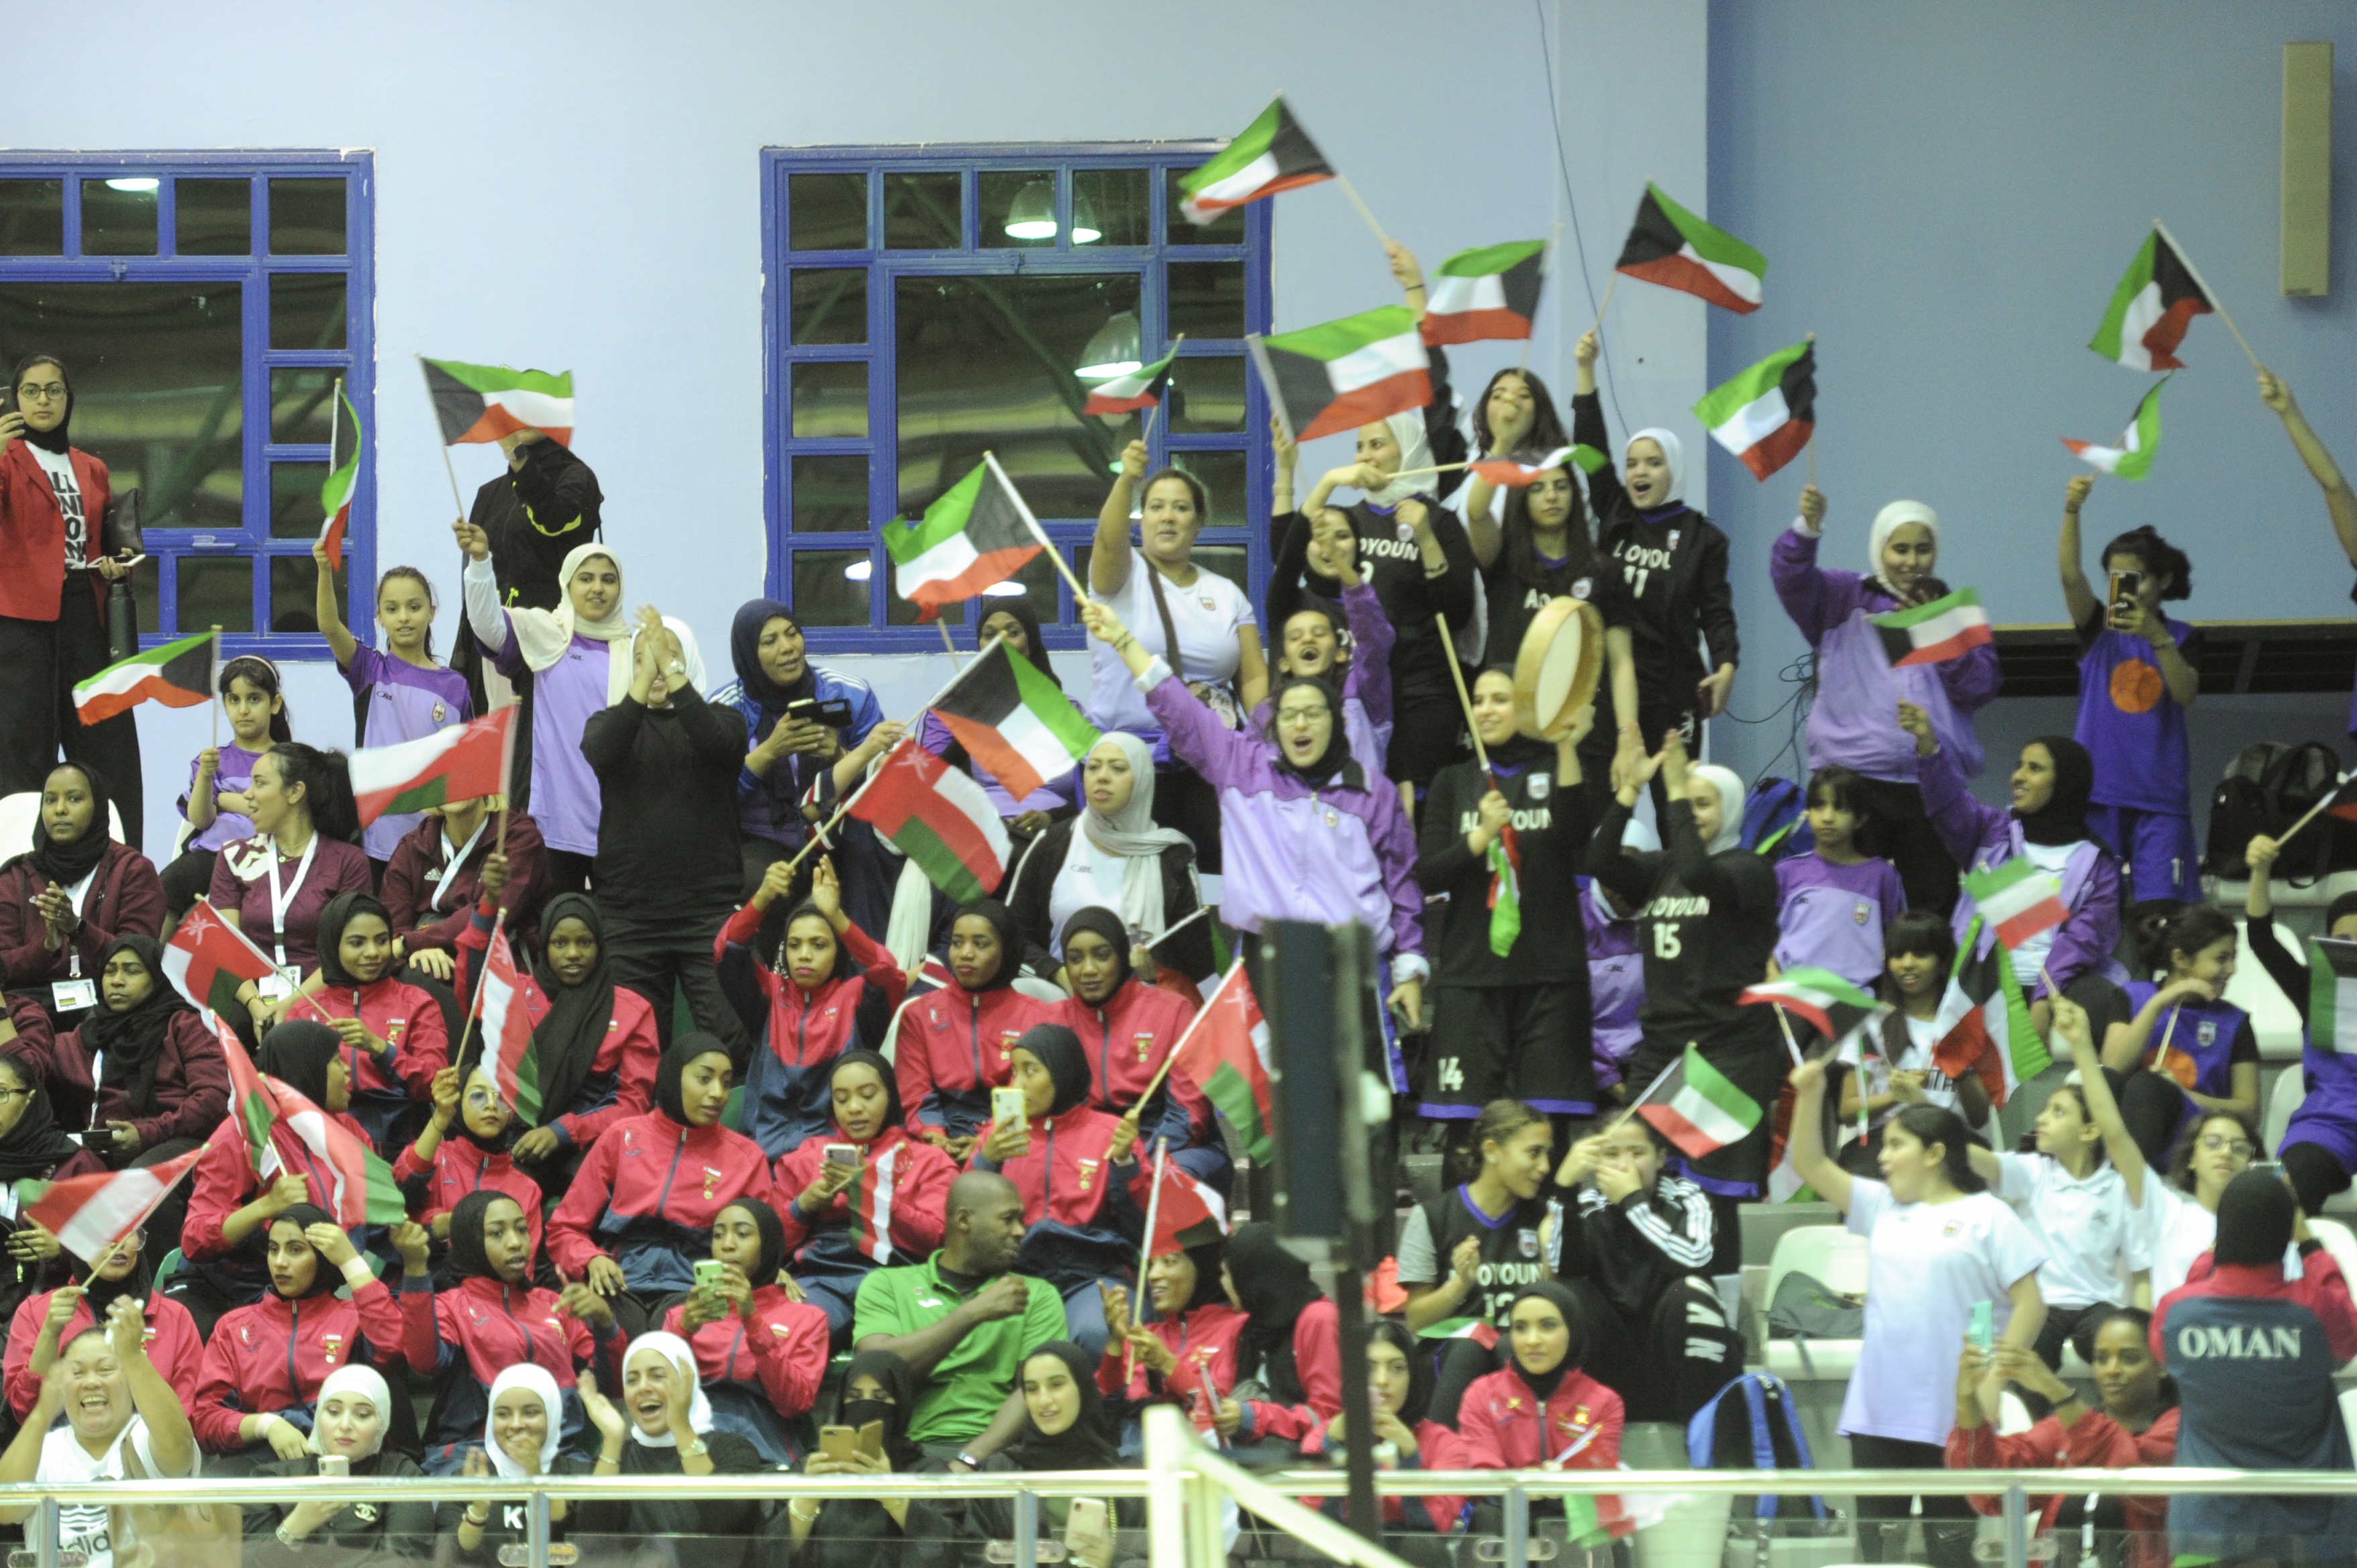 Cheering audience for the Kuwaiti and Omani teams